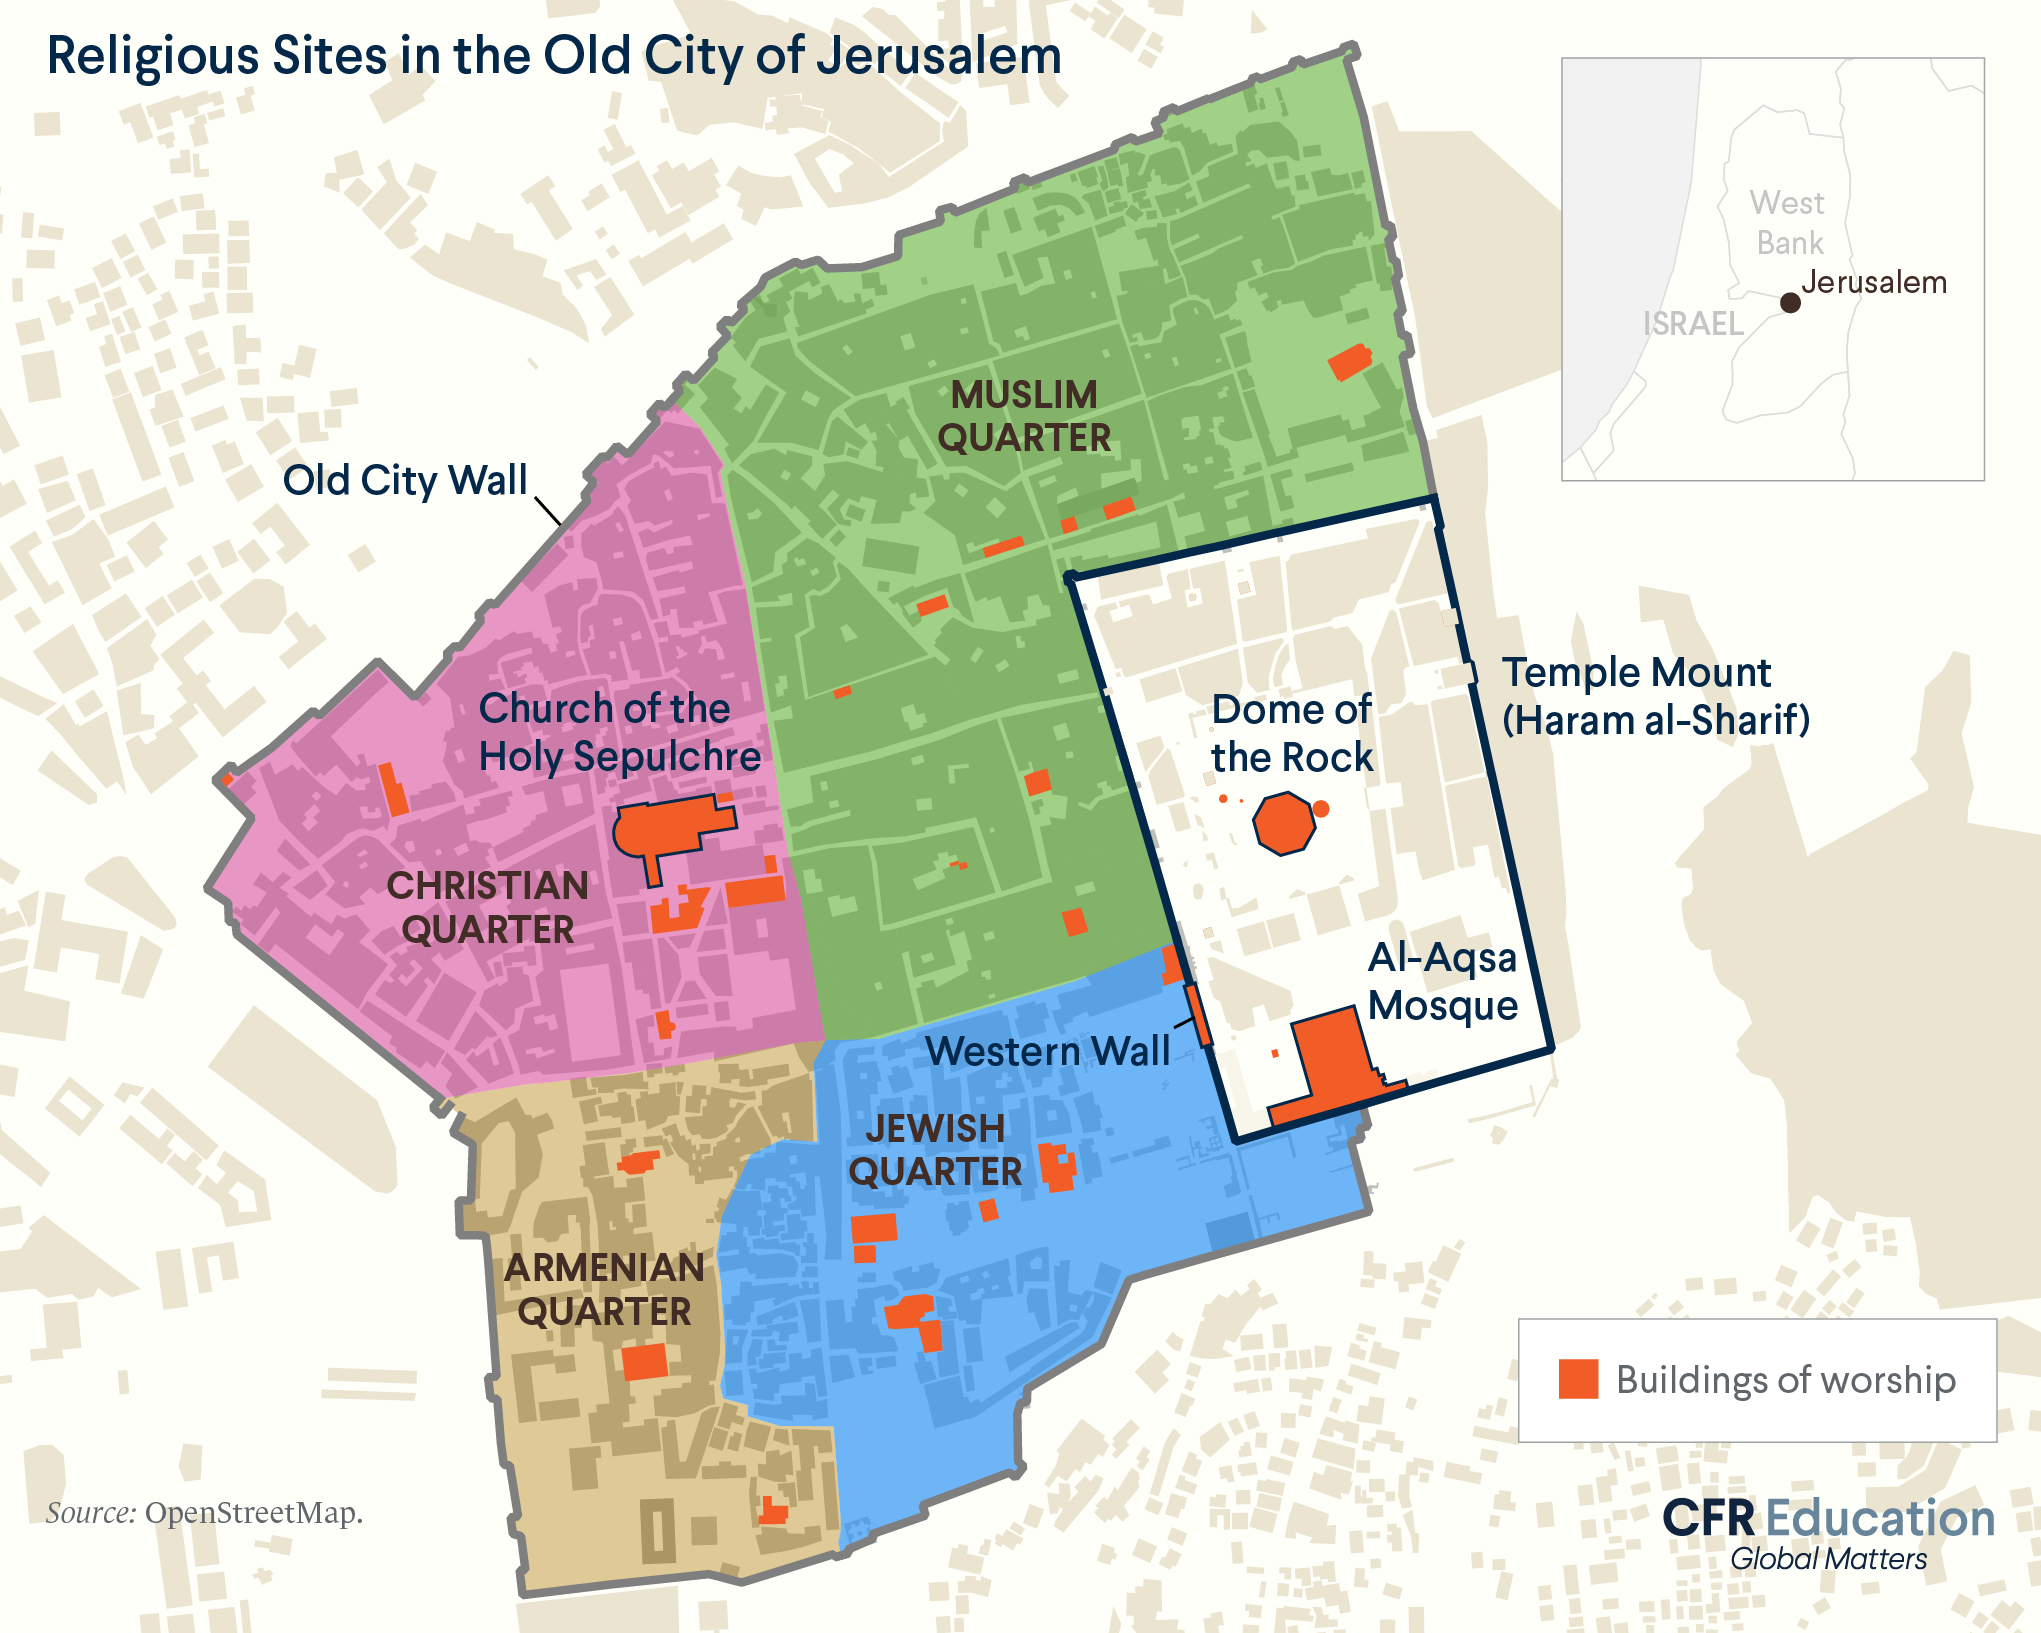 Map shows religious sites in the Old City of Jerusalem, including holy site known as Temple Mount to Jews and Haram al-Sharif to Muslims. For more info contact us at cfr_education@cfr.org.